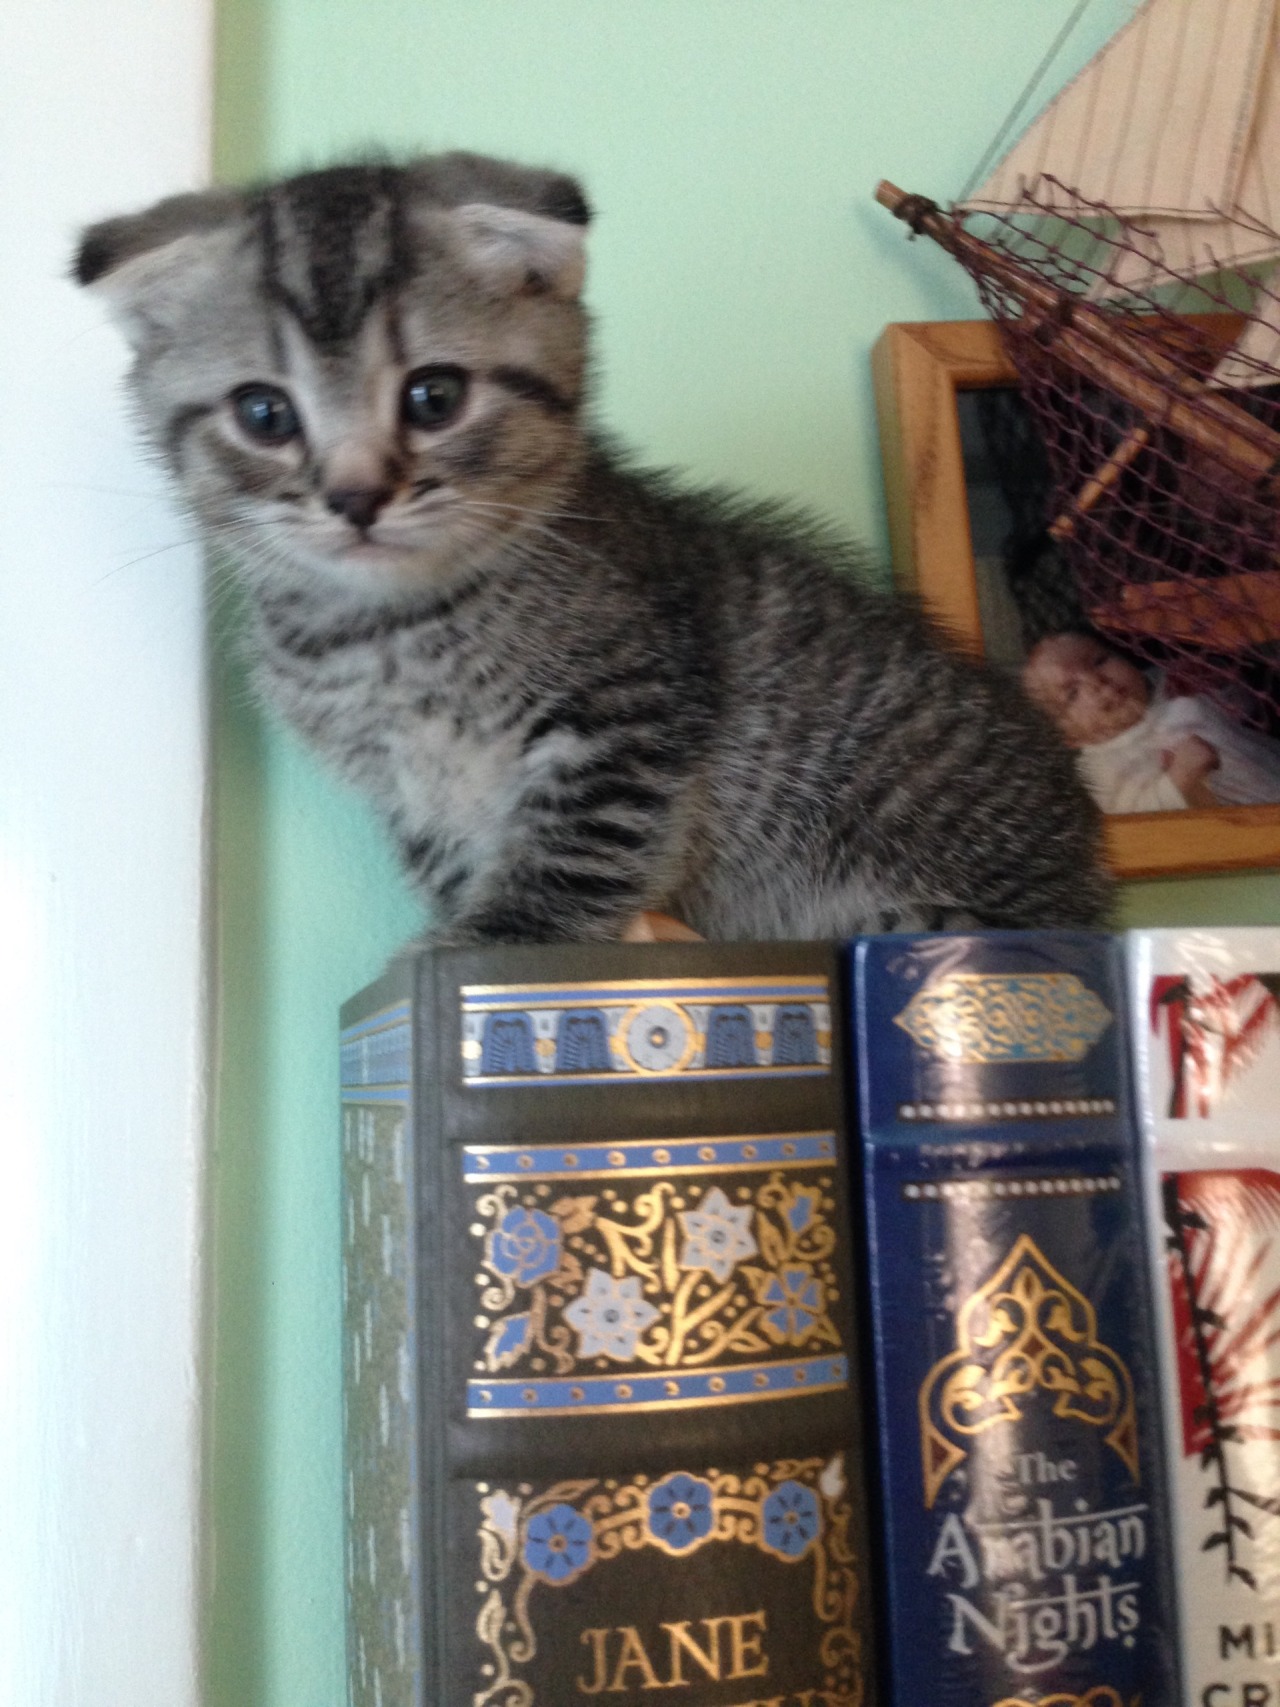 bookphile:  Me: Mom, send me pictures of kittens with the books, so I can put them